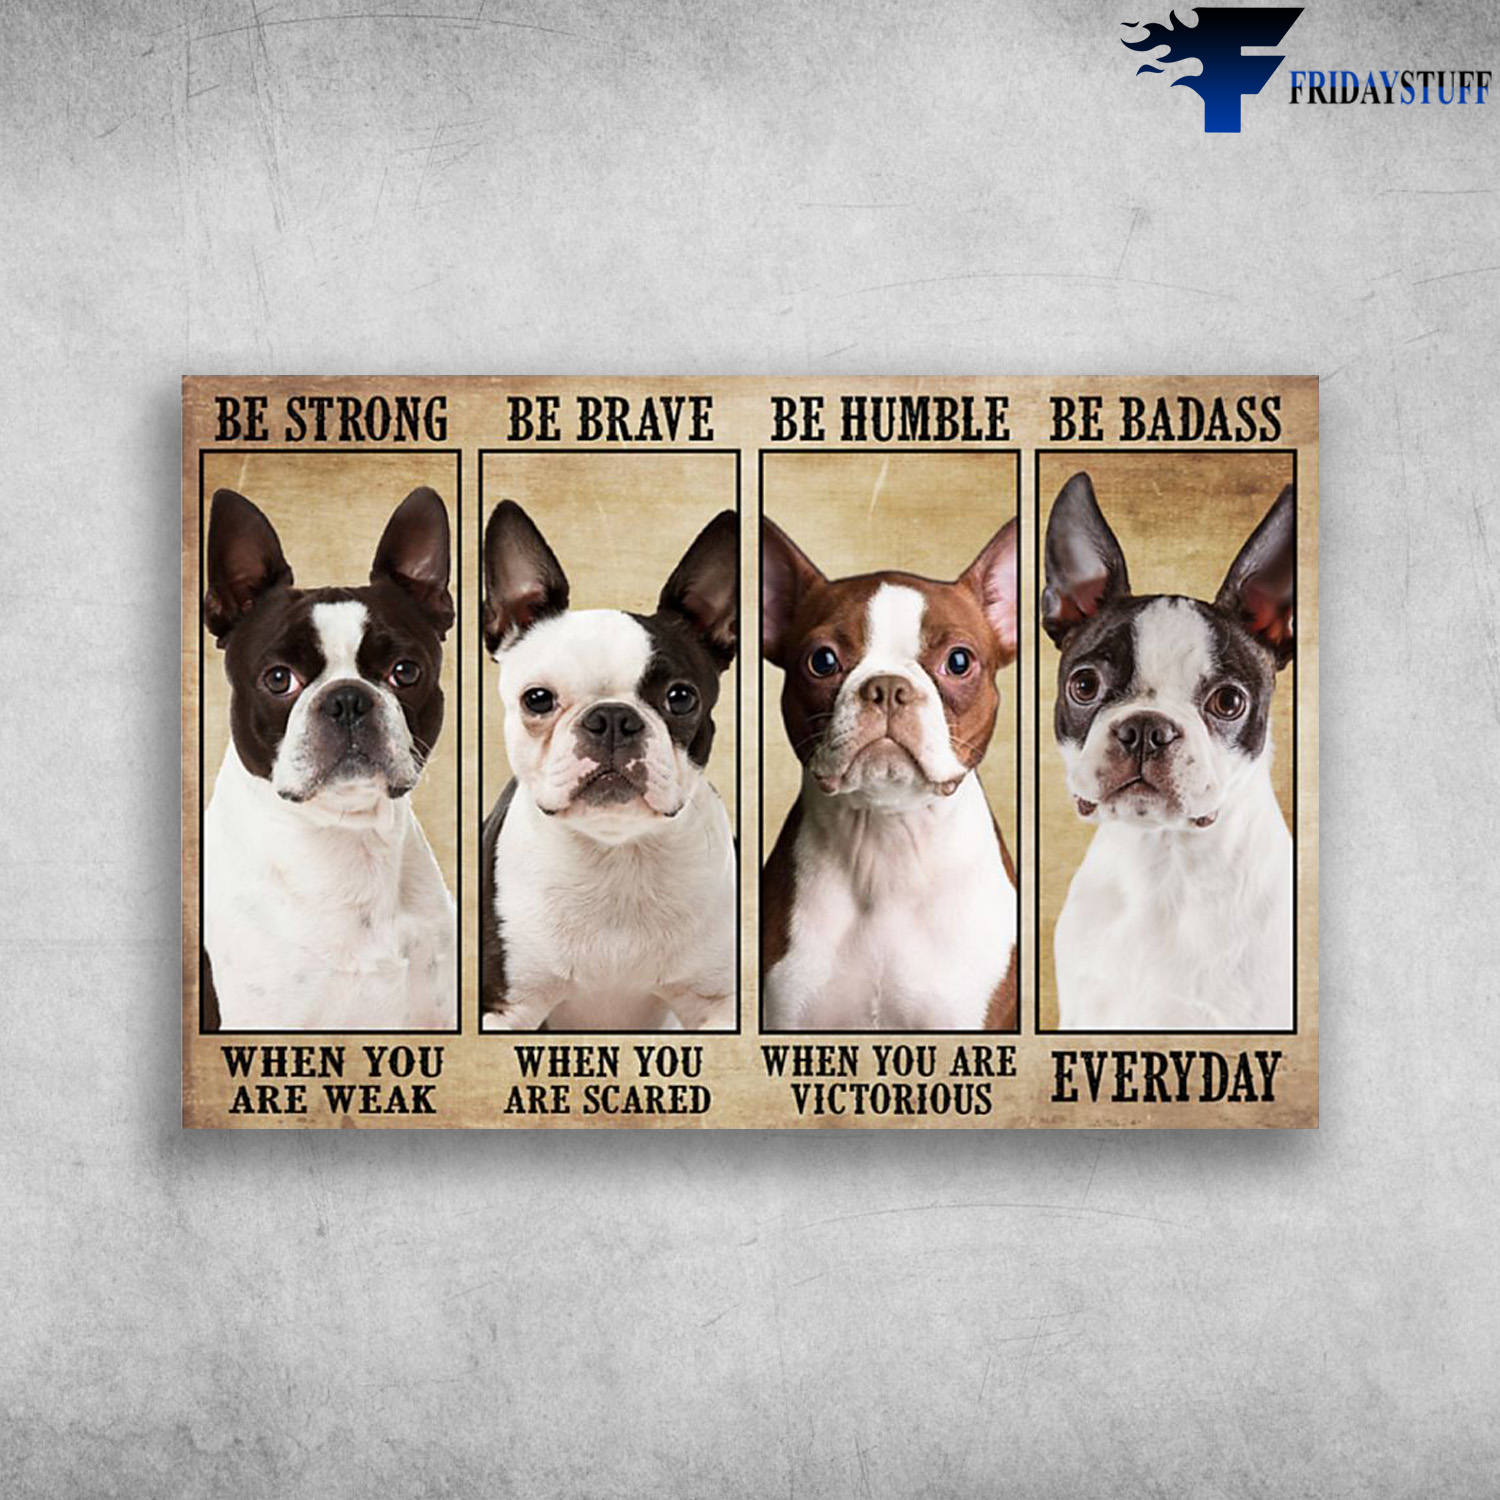 Boston Terrier - Be Strong When You Are Weak, Be Brave When You Are Scared, Be Humble When You Are Victorious, Be Badass Everyday